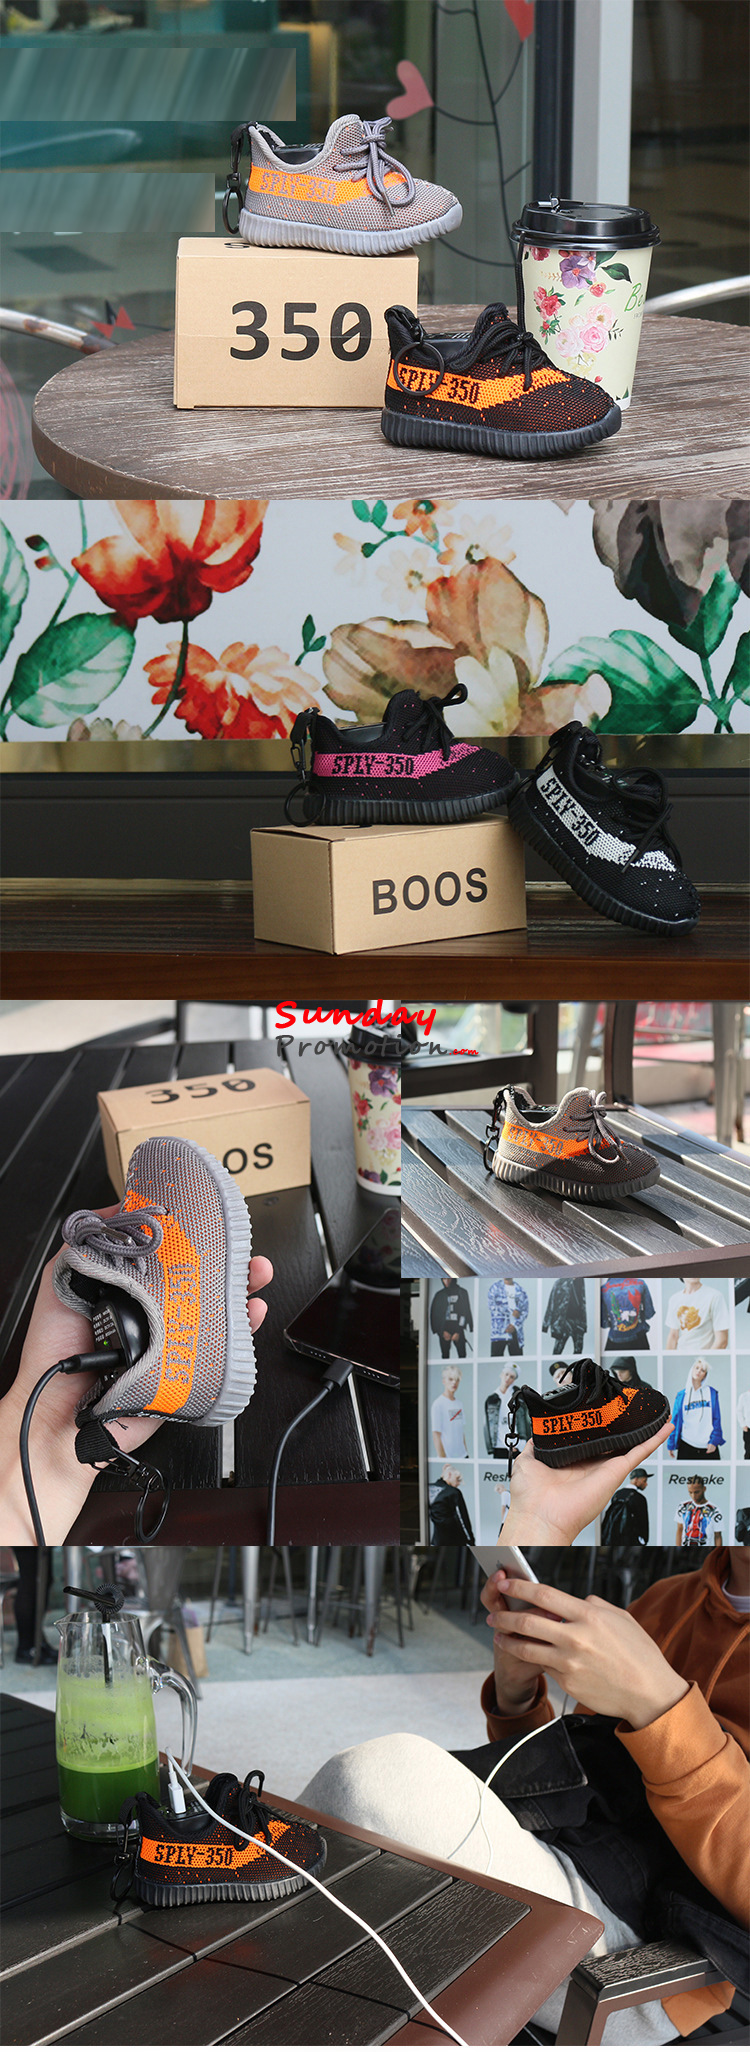 Sneaker Power Banks 350 Shoes Design Phone Charger